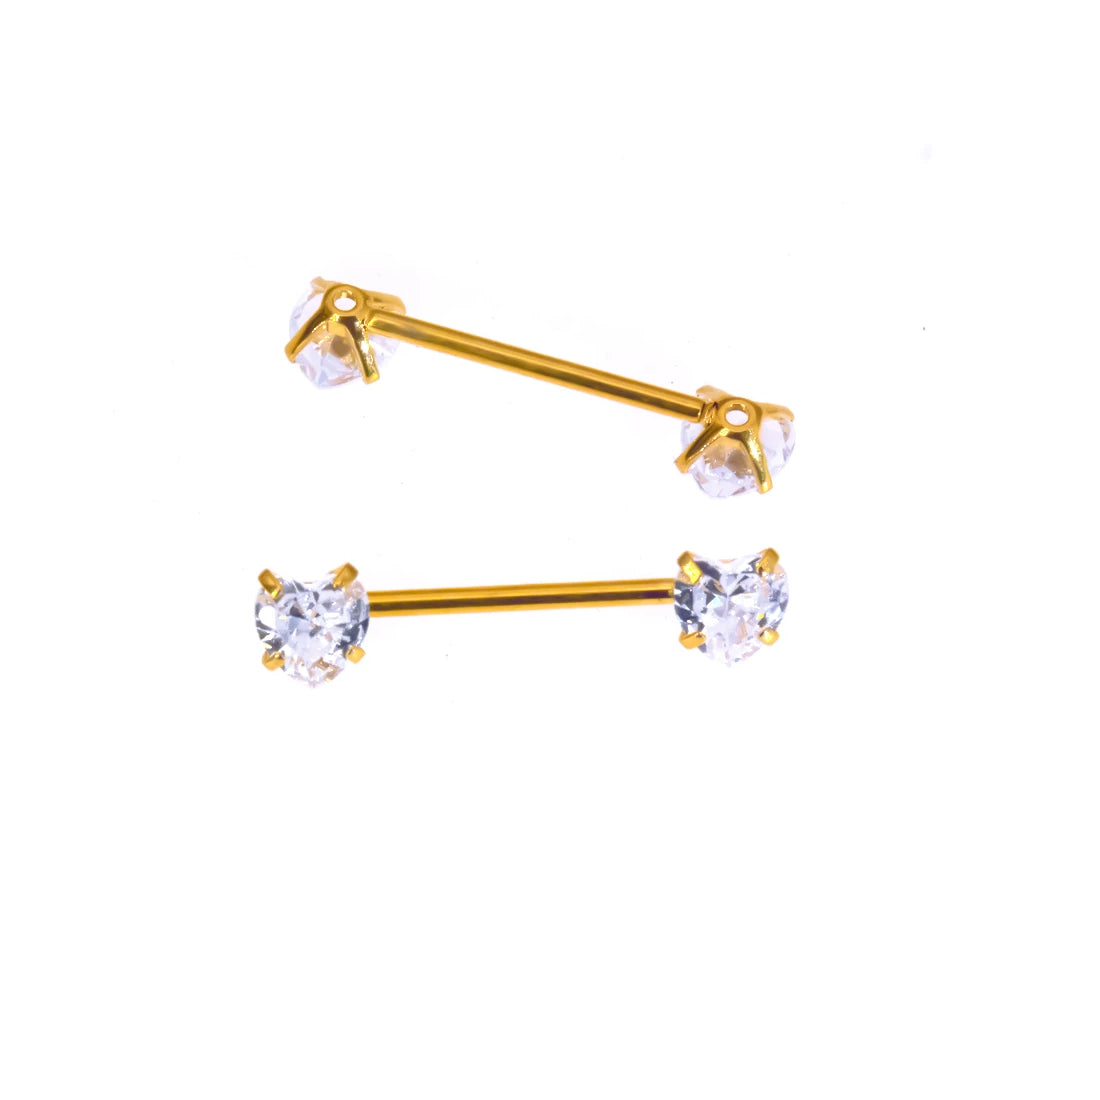 Heart nipple rings with diamonds gold and silver titanium 2 pieces nipple piercing barbells 16G